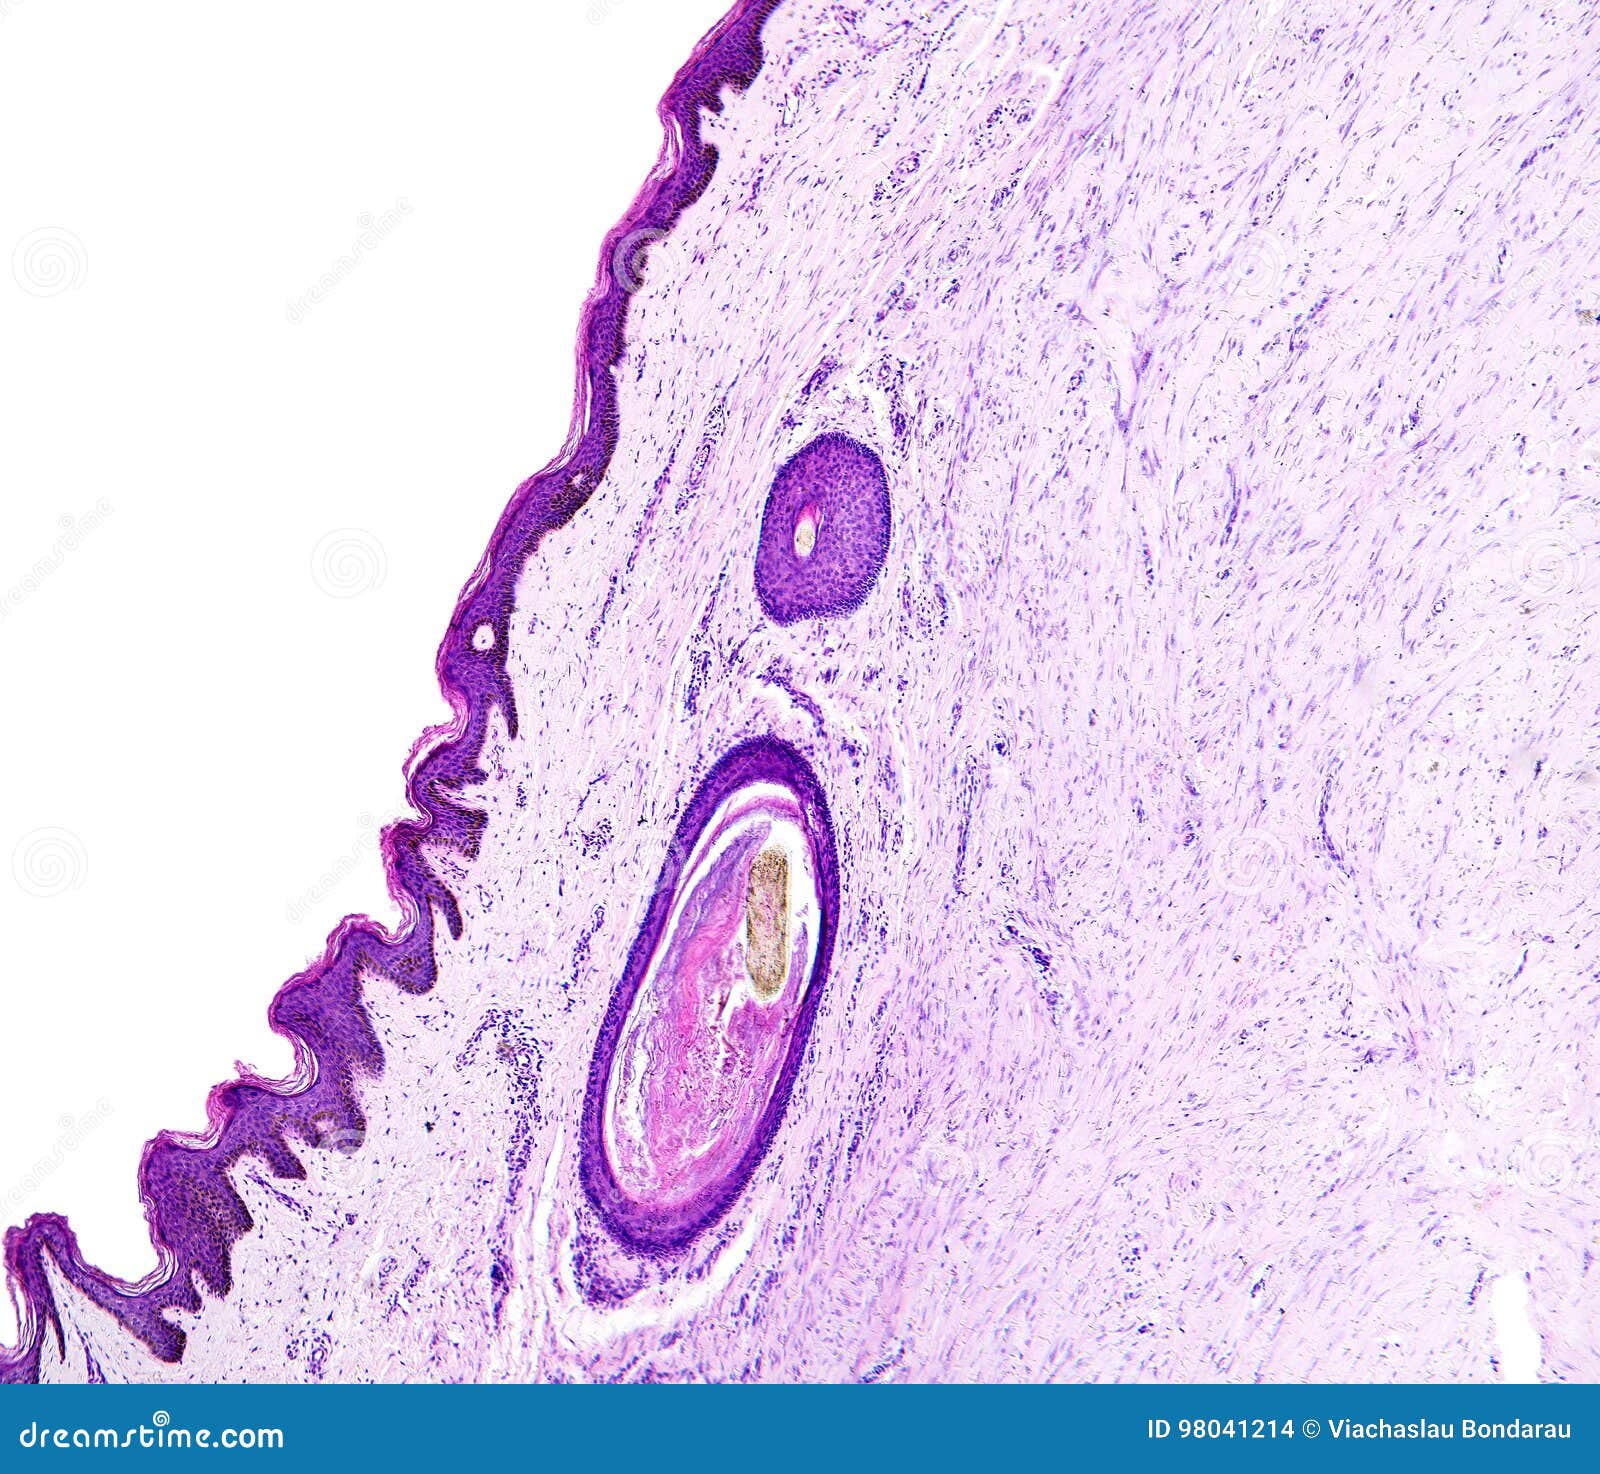 histology of human tissue, show skin with hair follicles as seen under the microscope.